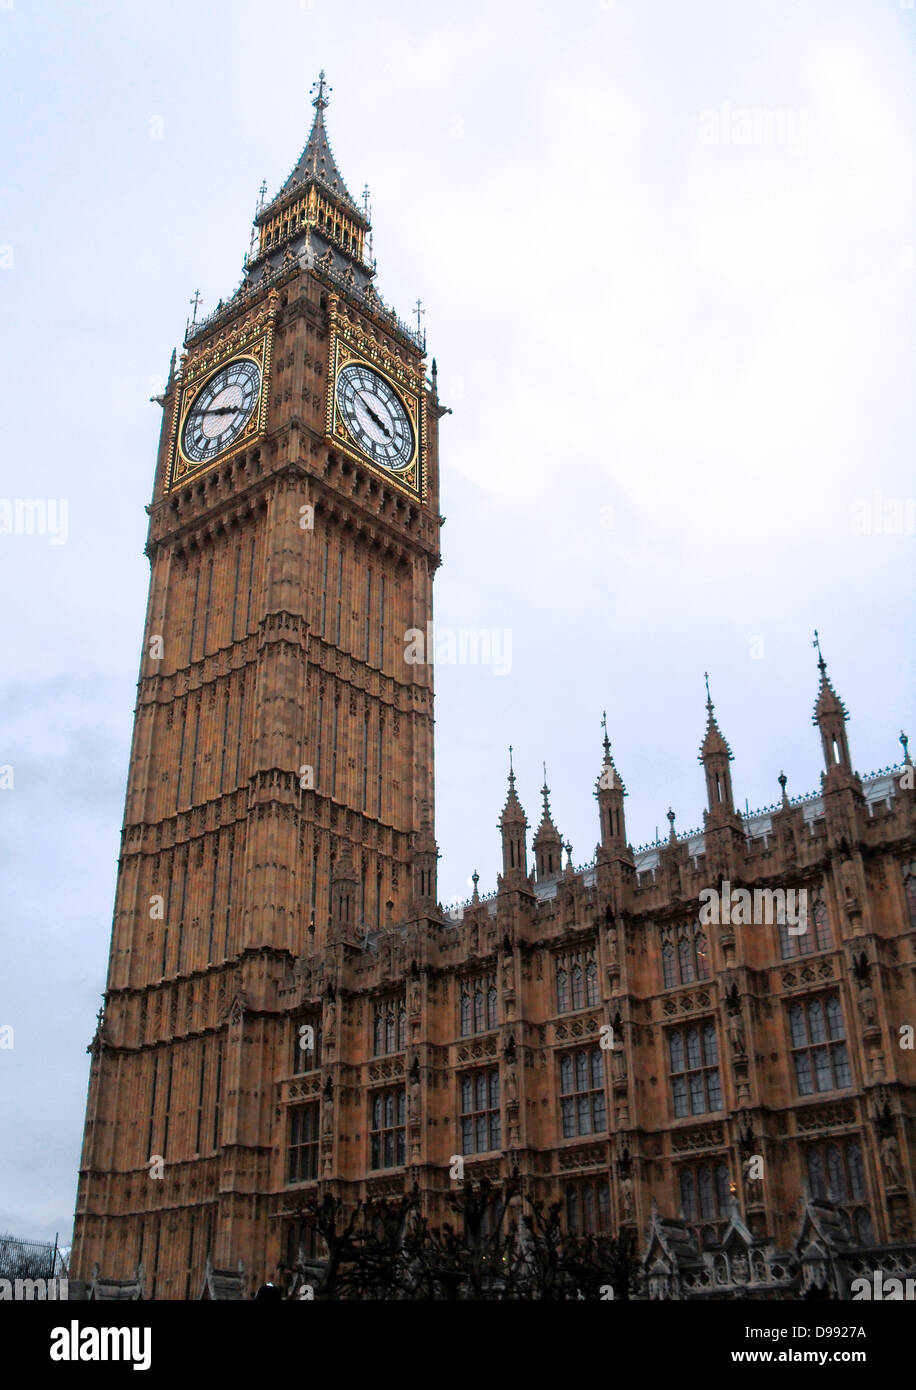 Big Ben with clock face visible in two sides of the tower at the British Houses of Parliament, London Stock Photo